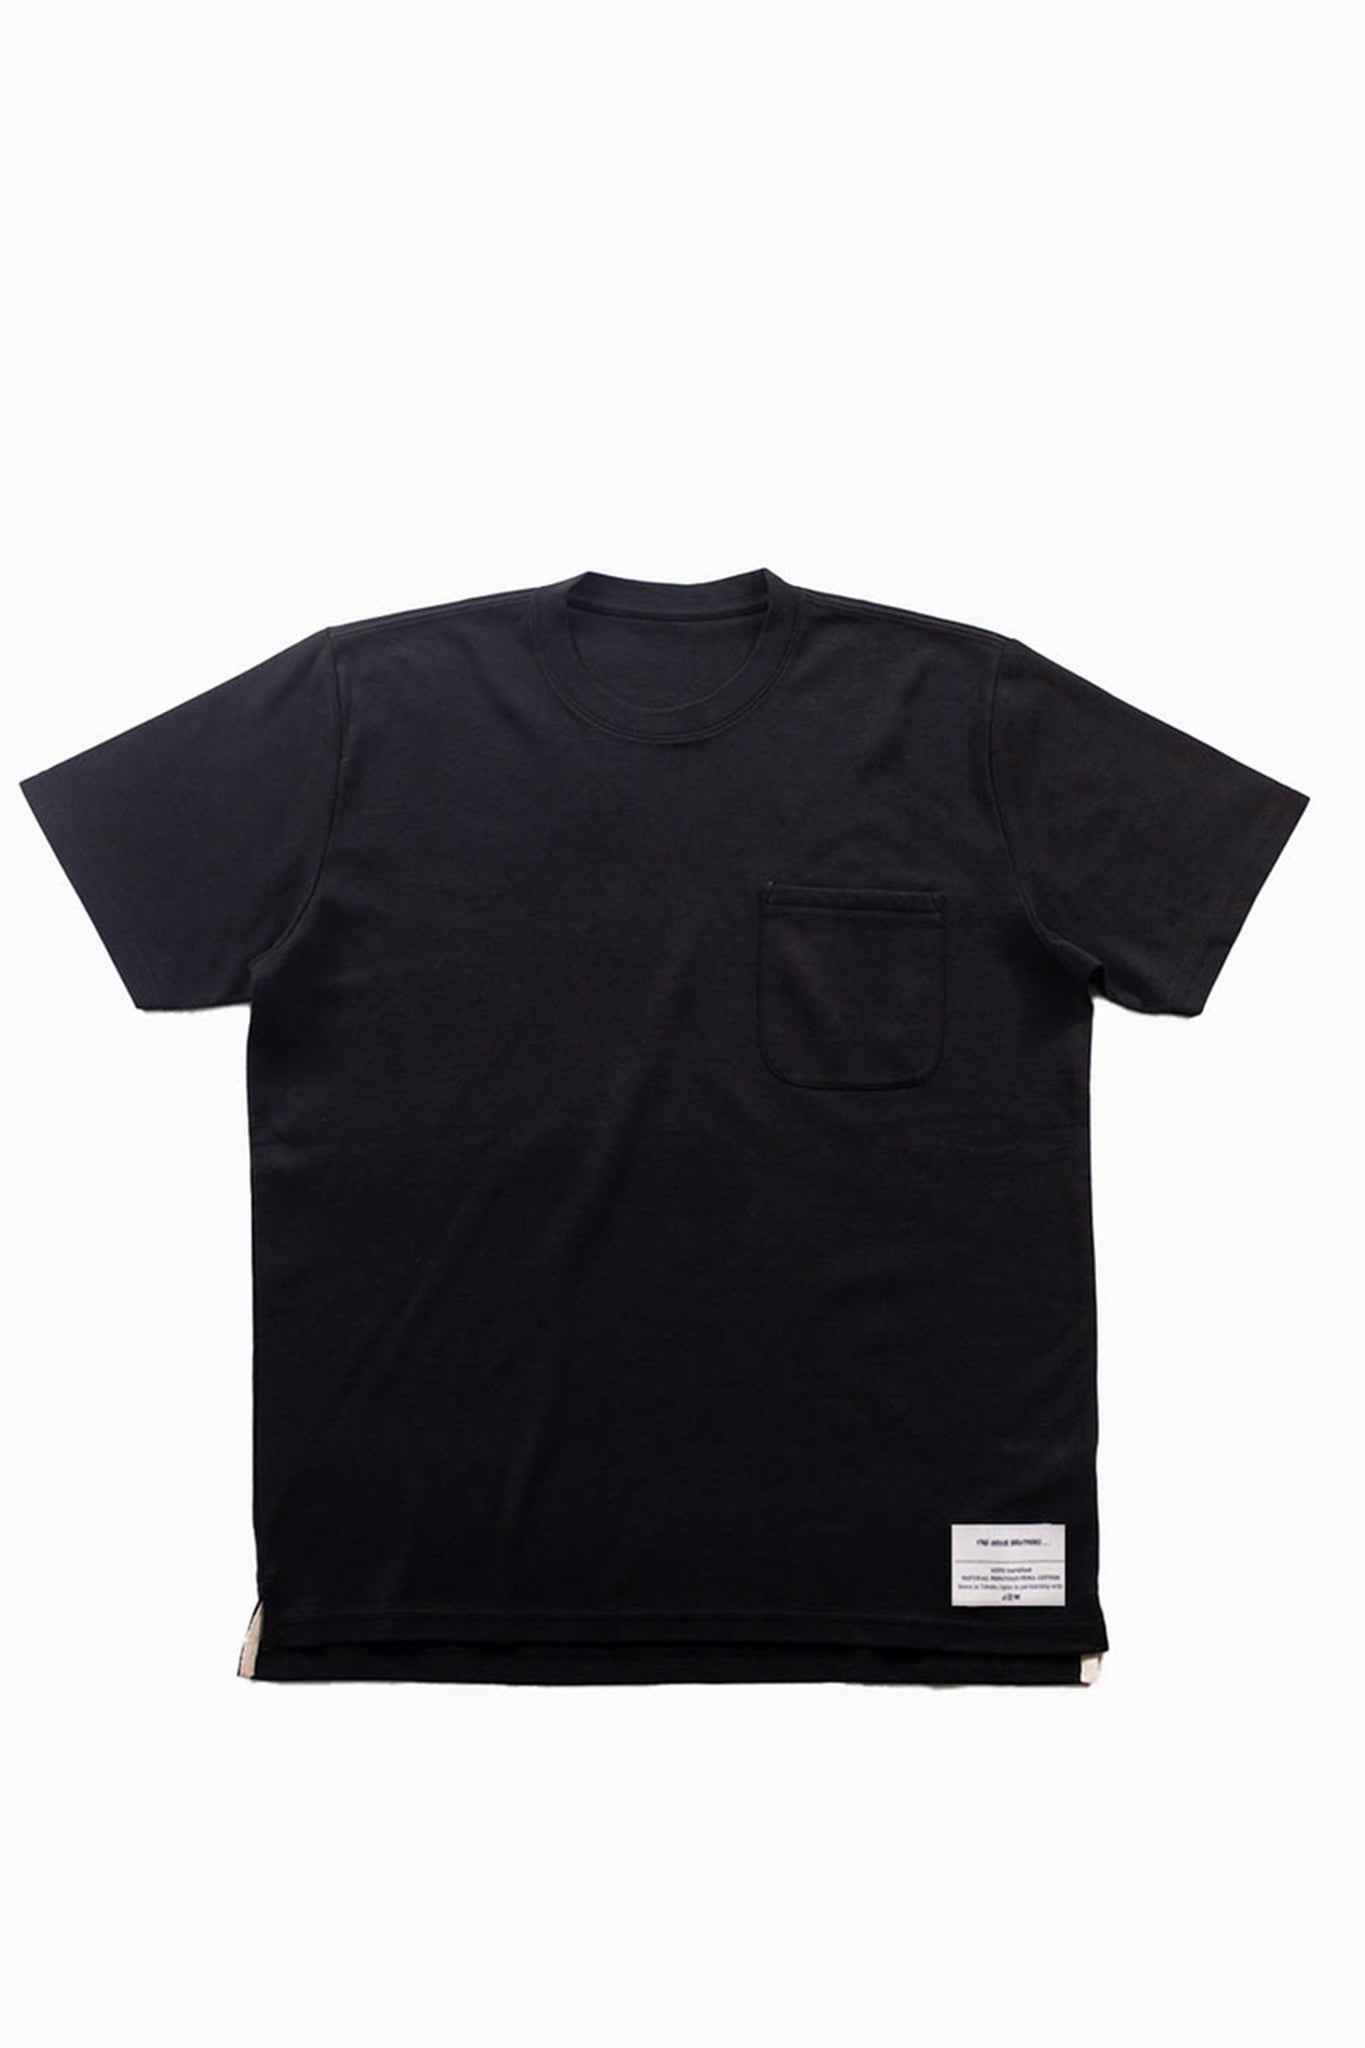 THE INOUE BROTHERS... "BASIC POCKET T-SHIRT / NATURAL PIMA COTTON PROJECT / BLACK"